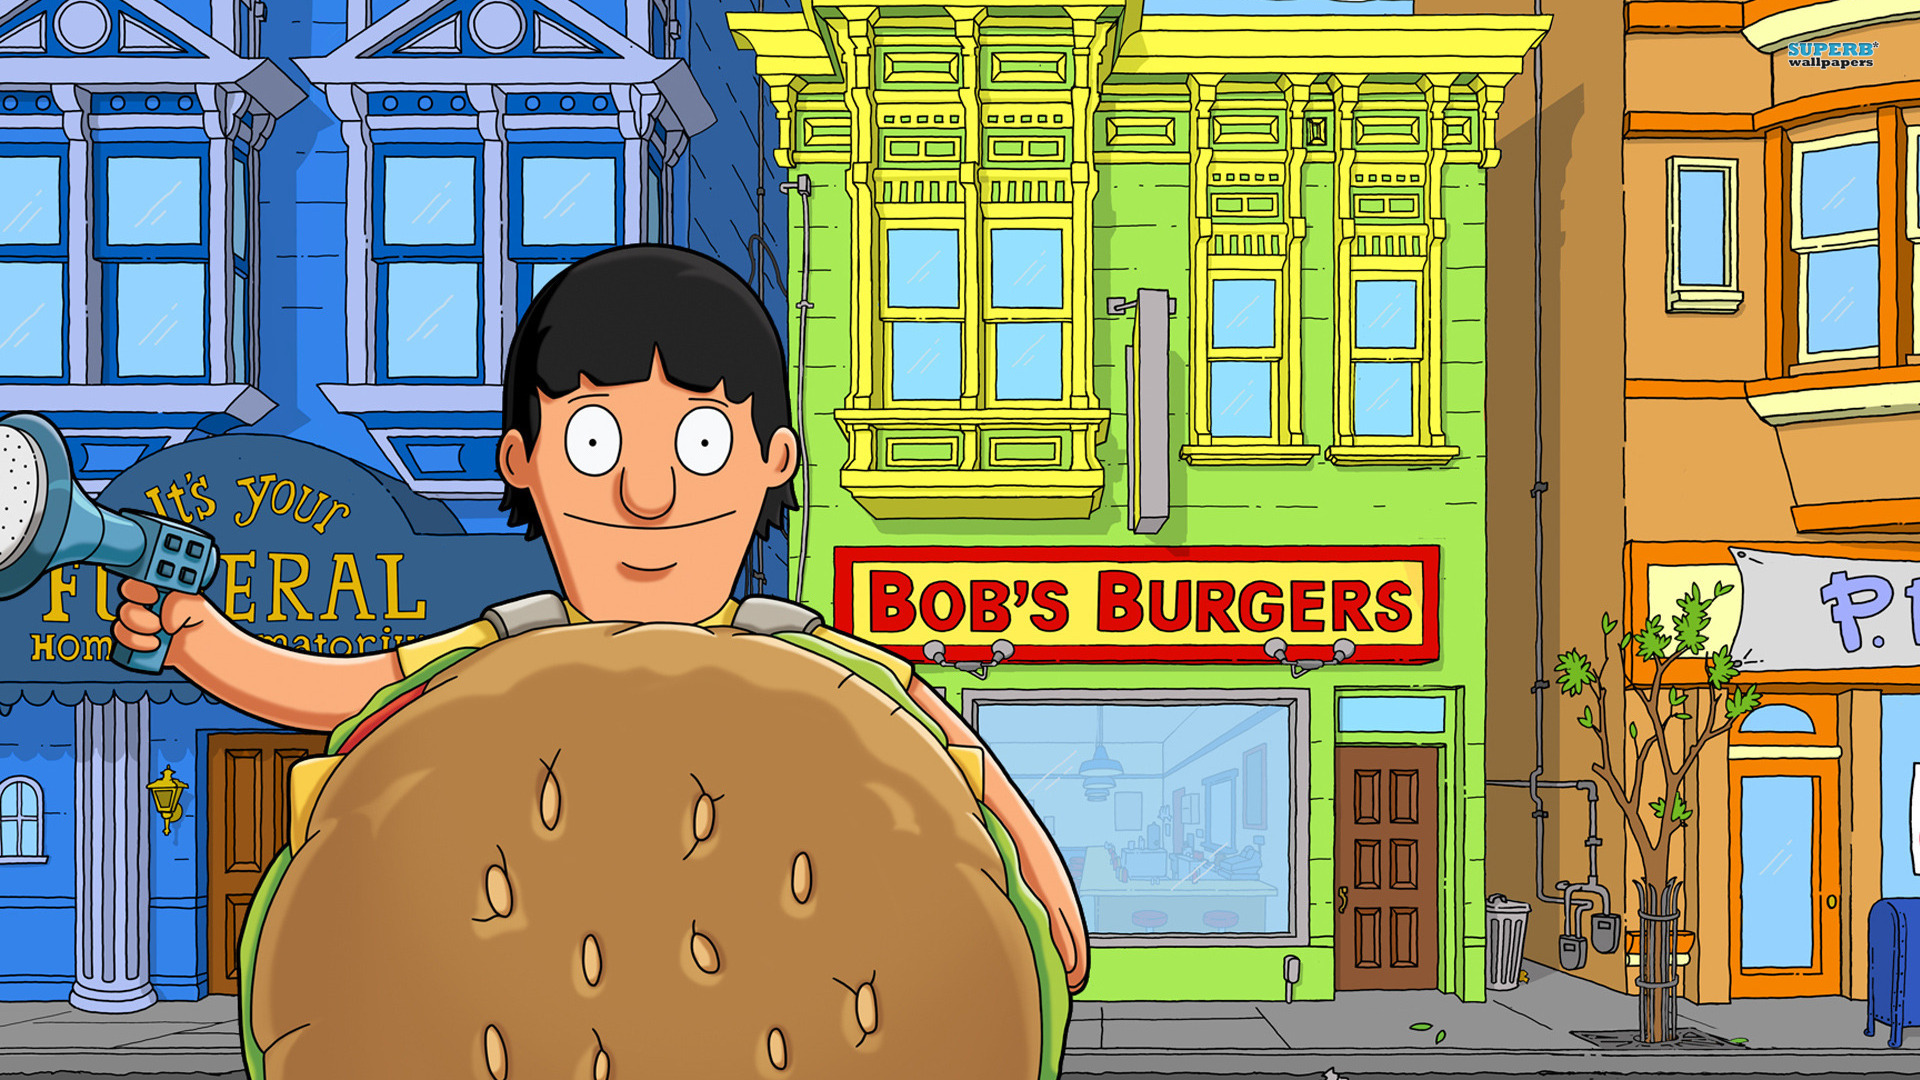 Bobs Burgers wallpapers for desktop download free Bobs Burgers pictures  and backgrounds for PC  moborg